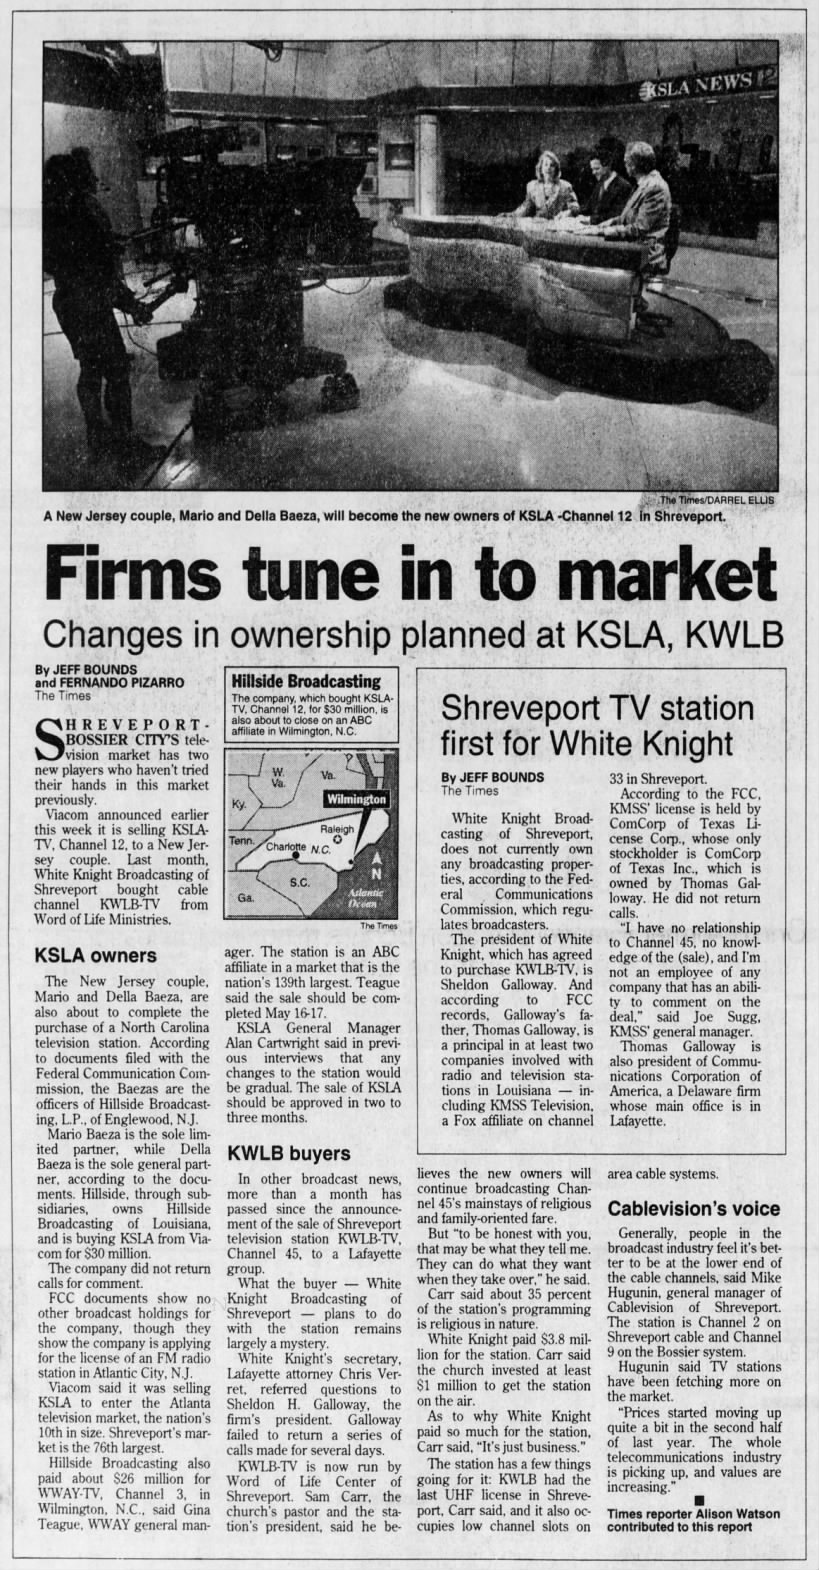 Firms tune in to market: Changes in ownership planned at KSLA, KWLB